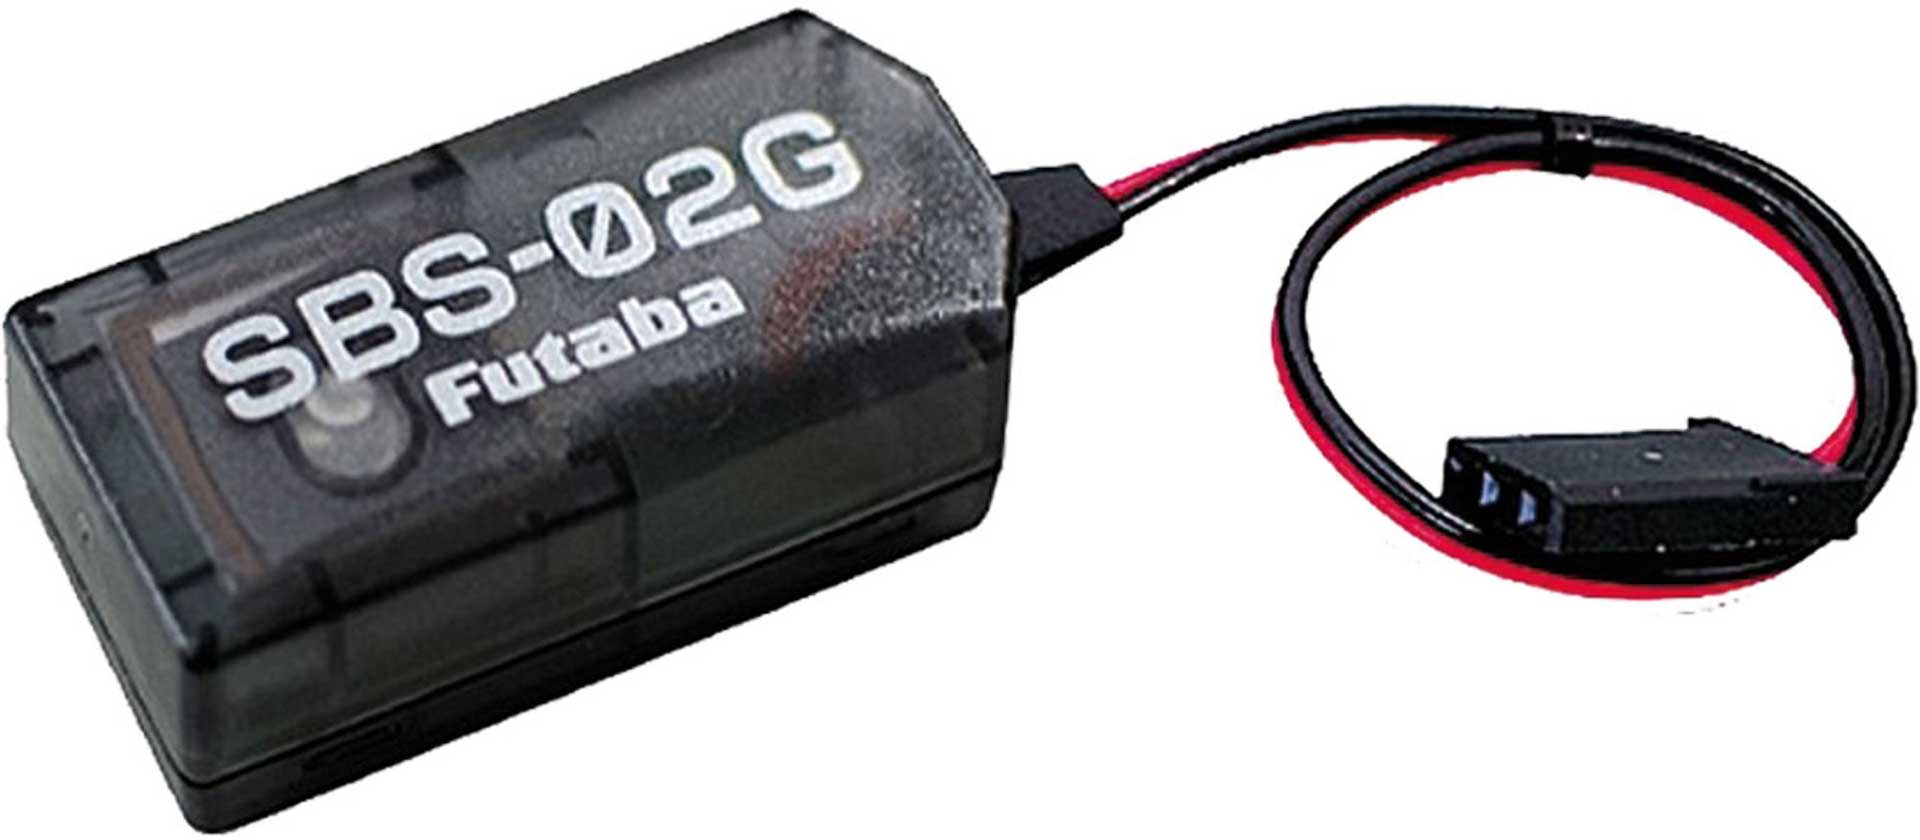 FUTABA GPS SENSOR SBS02G TELEMETRY FOR HEIGHT, VARIO, SPEED, DISTANCE AND POSITION